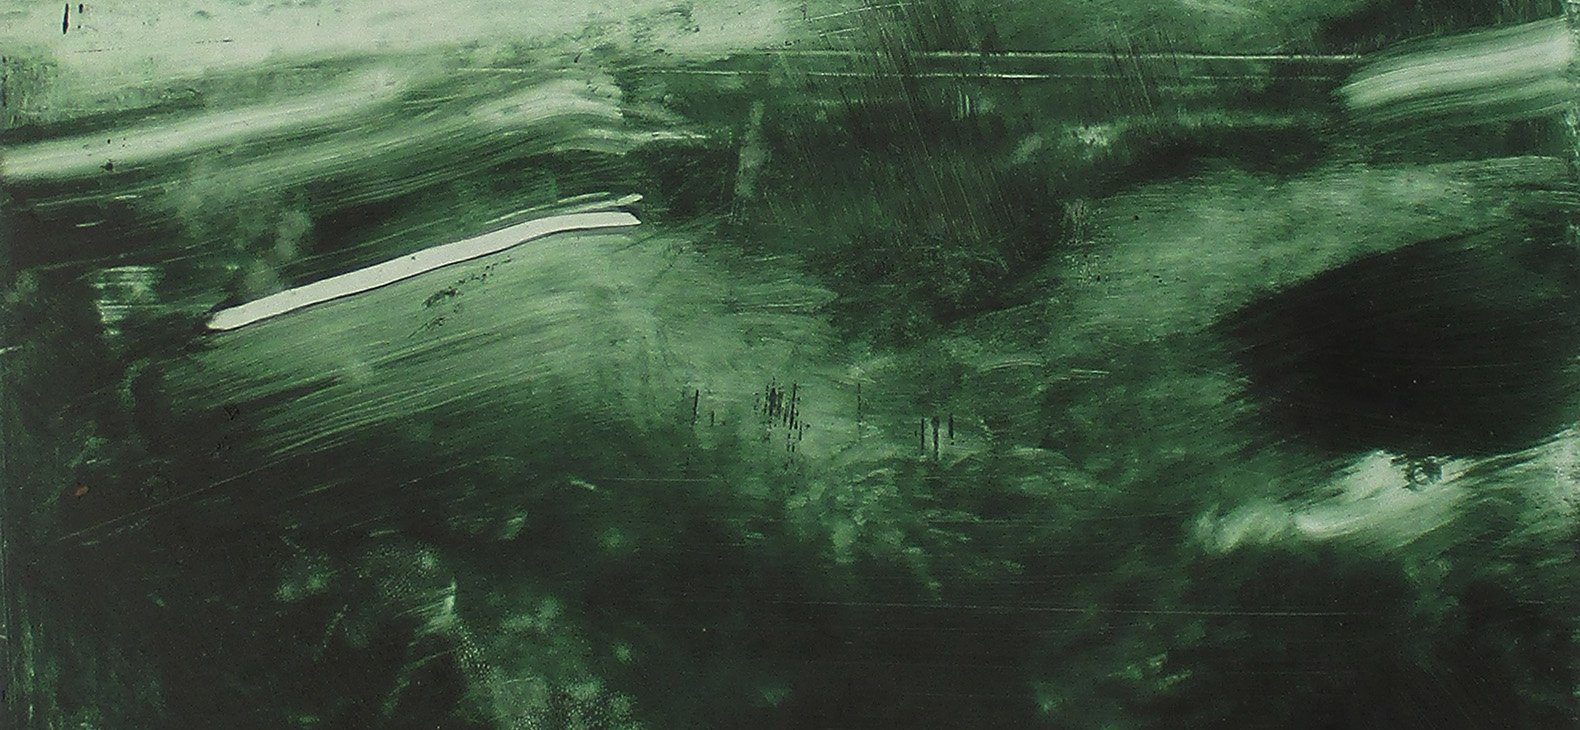 Dirk Pleyer: sketch of a painting for the exhibition "Night Vision" at Schafhof - Europäisches Künstlerhaus Oberbayern; image: abstract brushstrokes in green-white-black shades